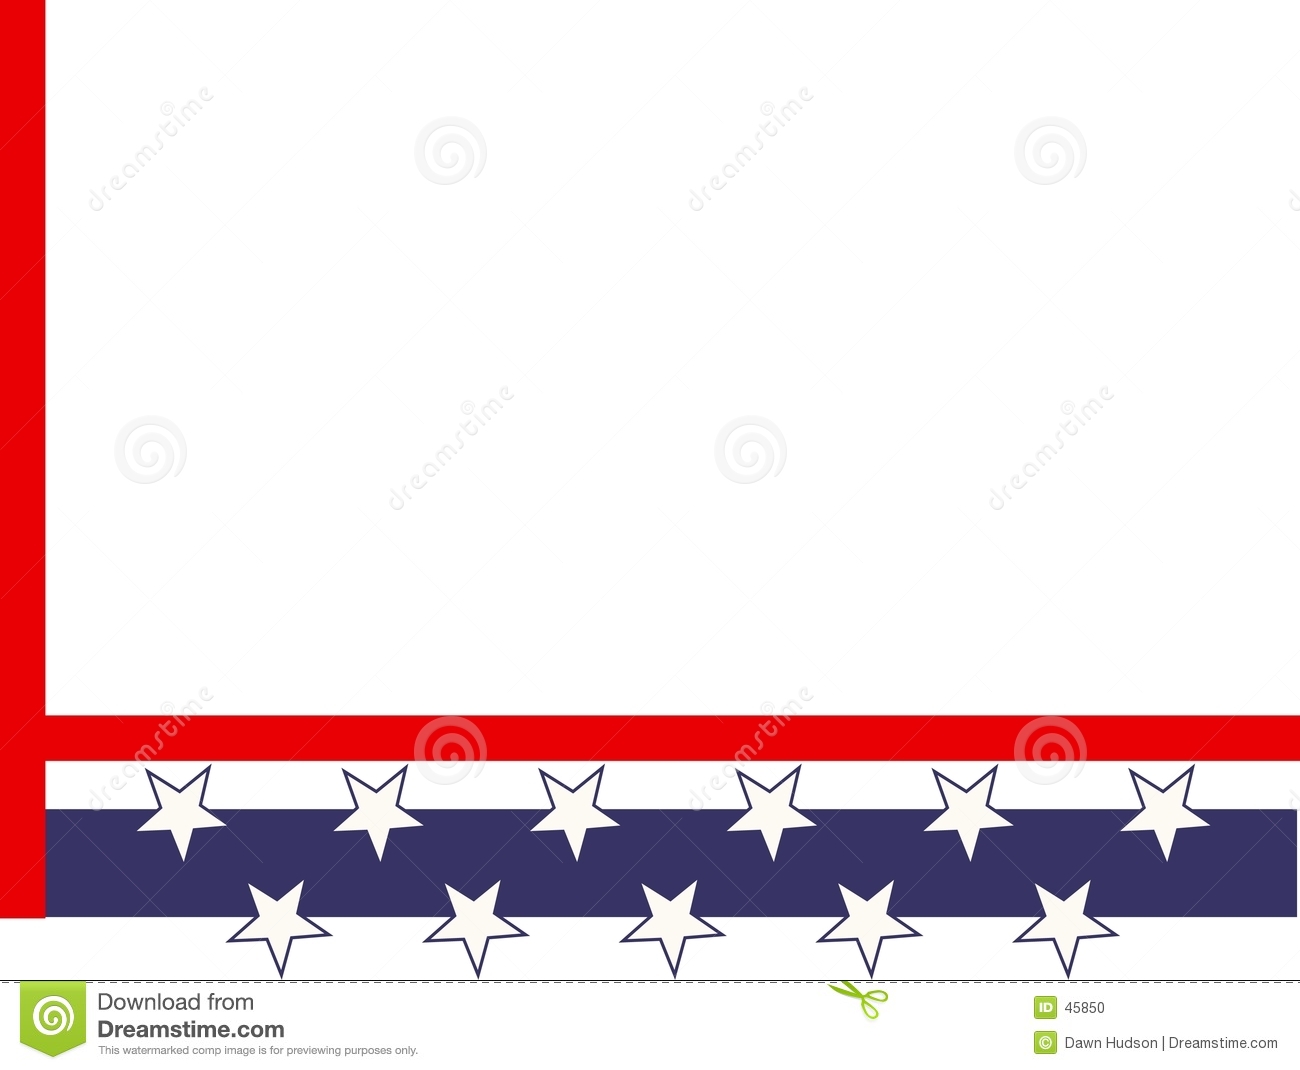 This Free Clip Art Stars And Stripes Borders Clip Art Is Available    